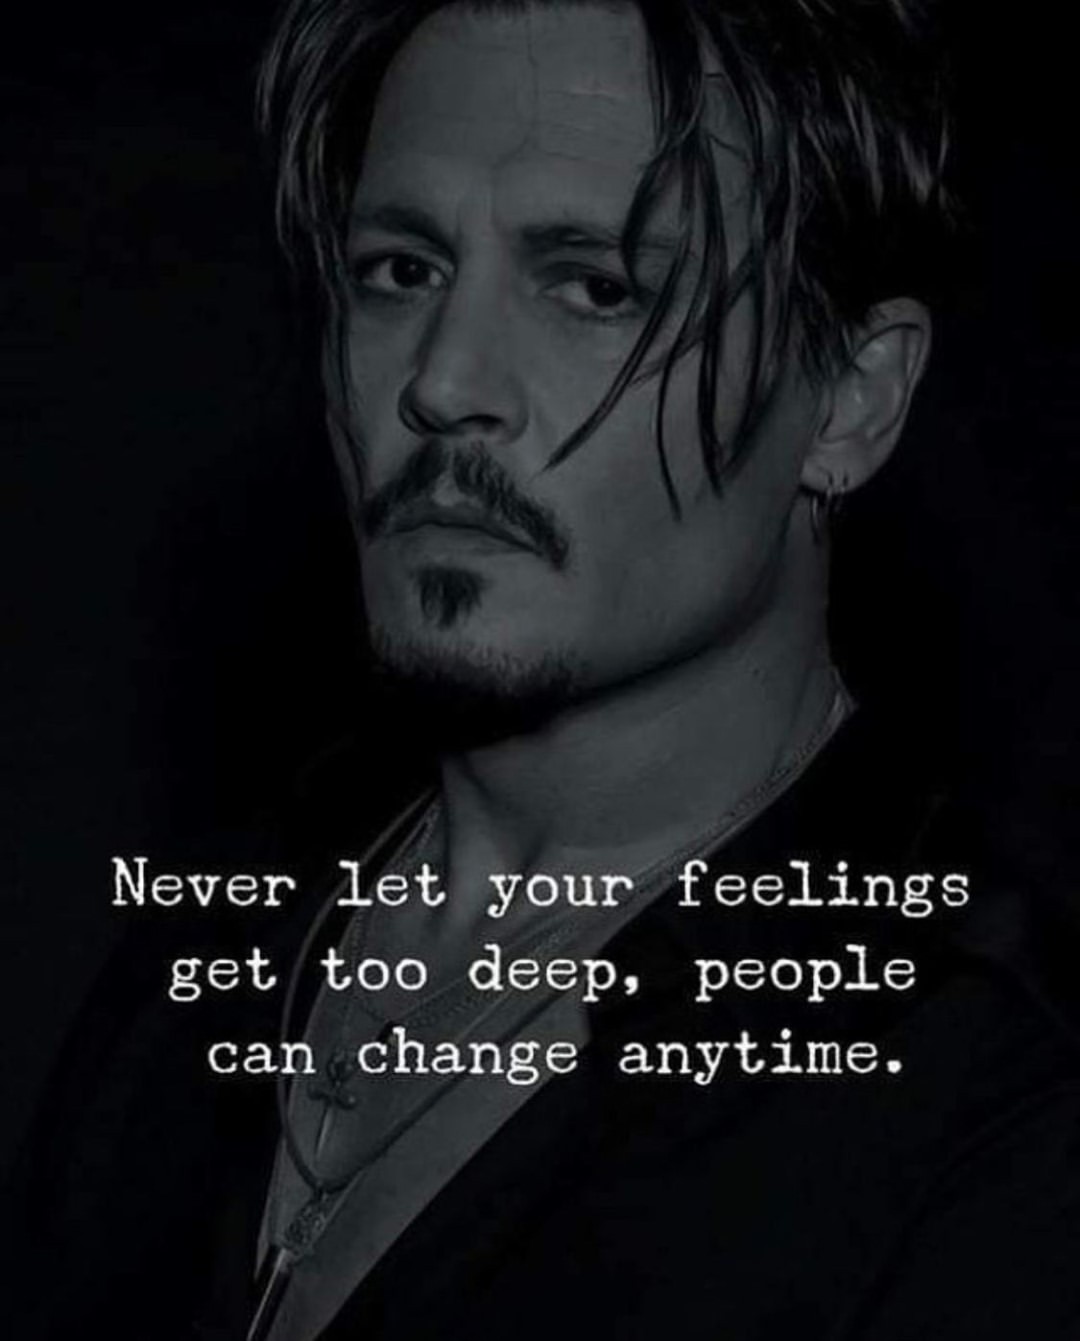 Never let your feelings get, too deep, people can change anytime.